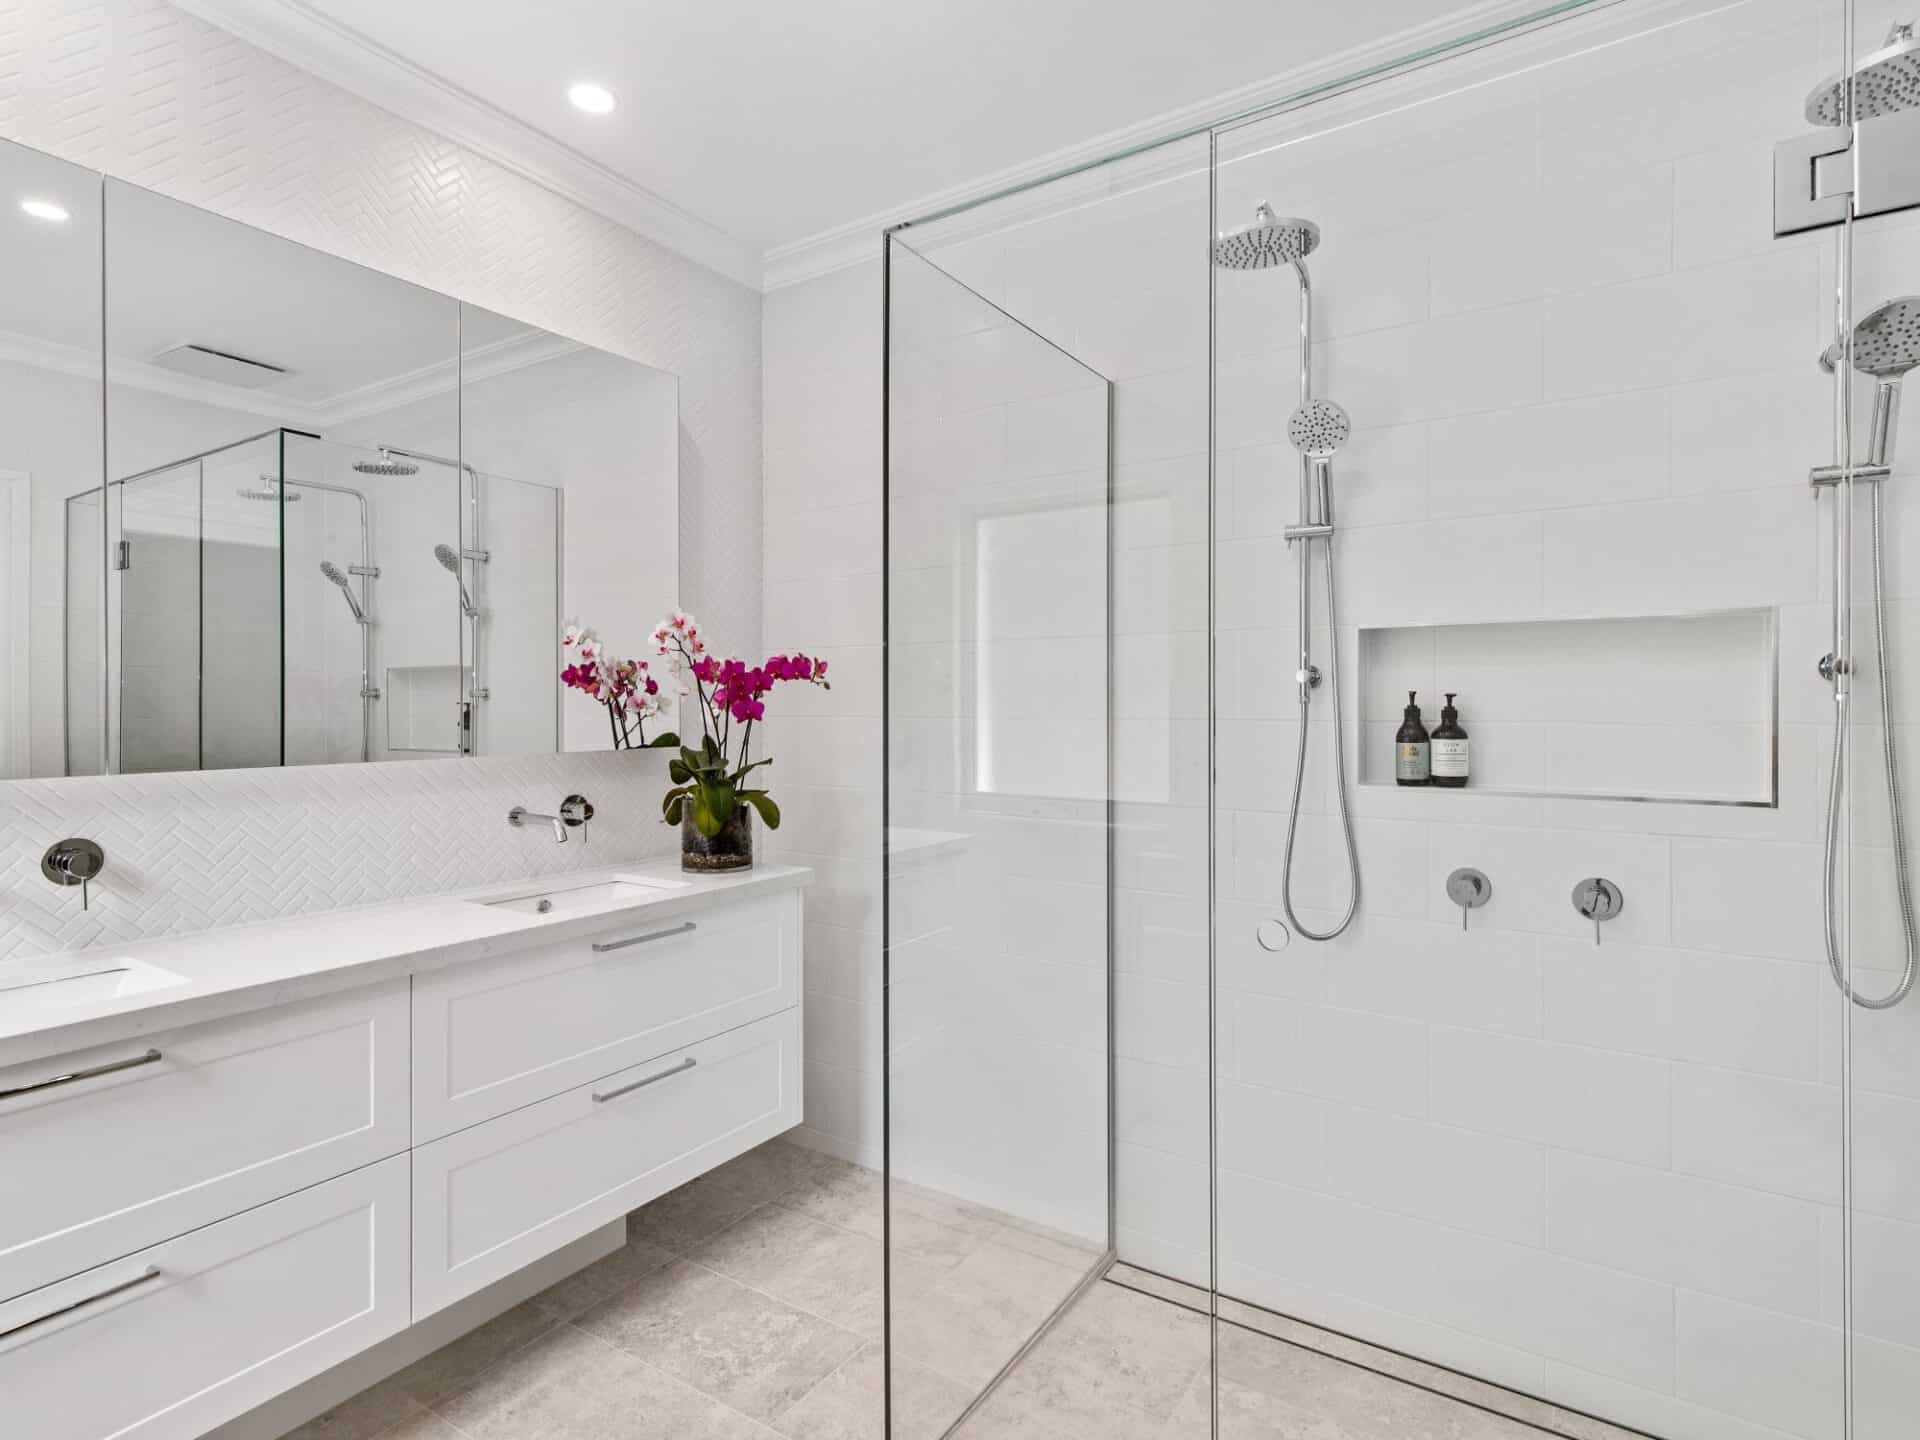 Shower & Basin Renovations Services - Bayview Renovations